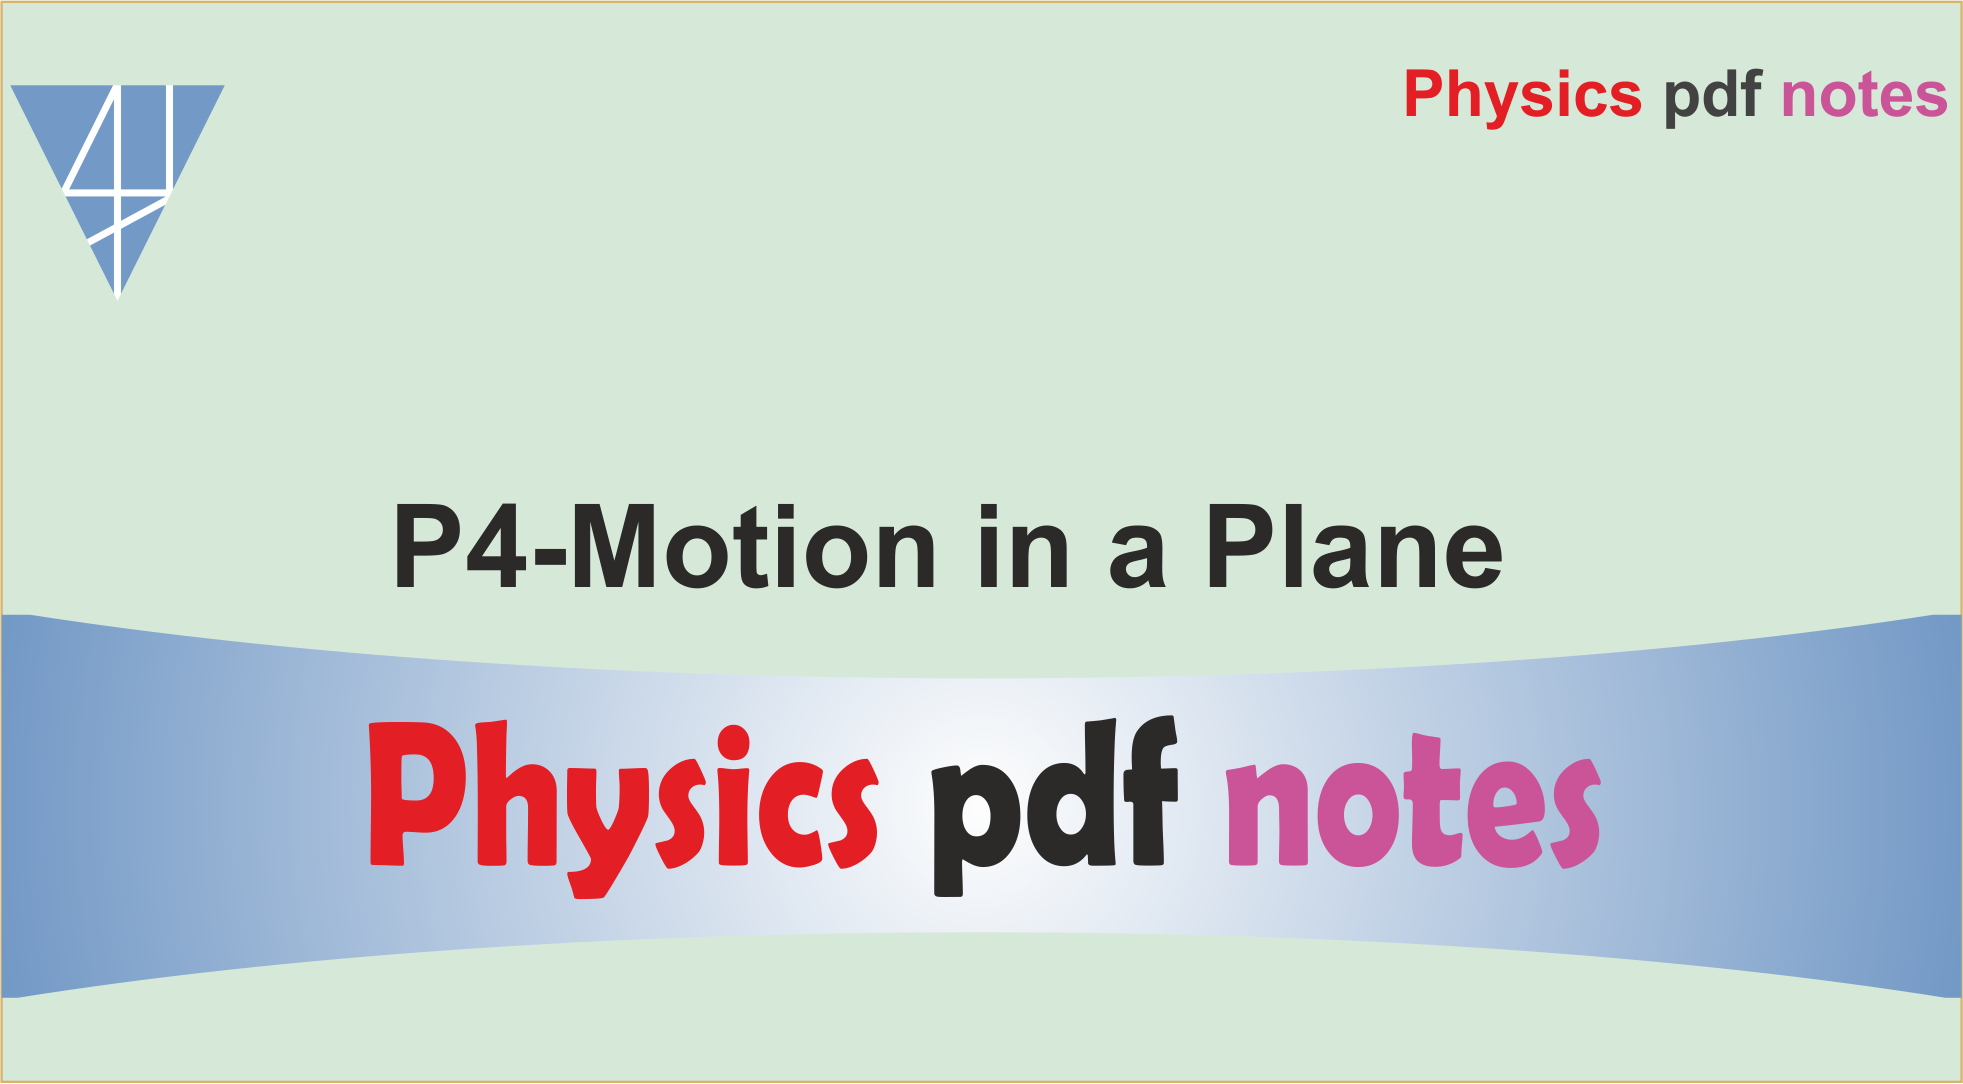 P4-Motion in a Plane